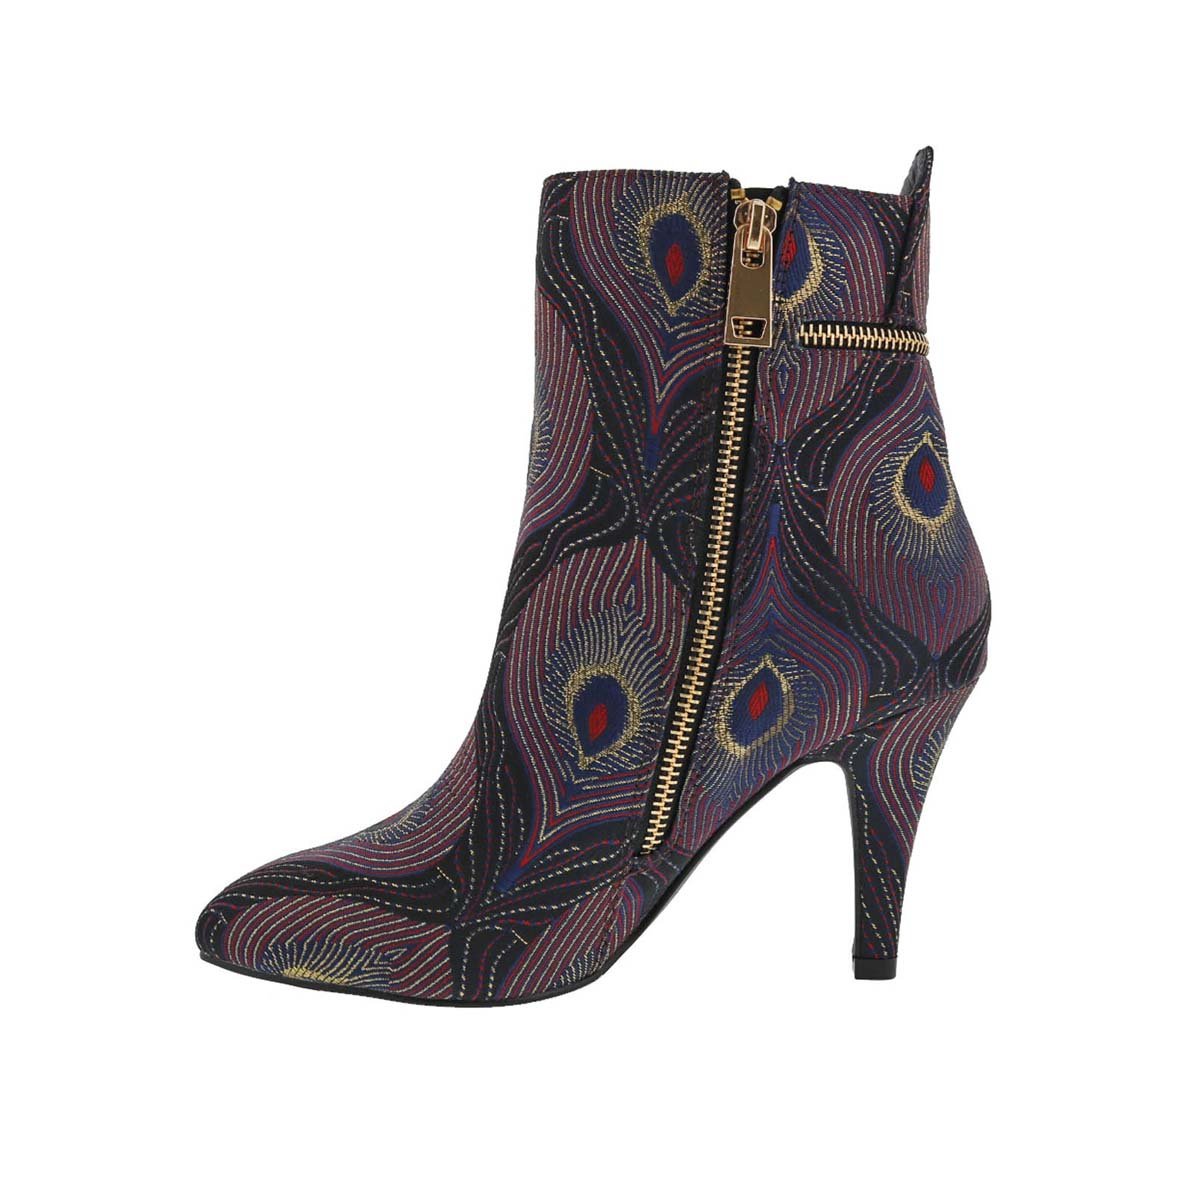 BELLINI CLAUDETTE WOMEN DRESSY ANKLE BOOT IN WINE GOLD COMBO - TLW Shoes